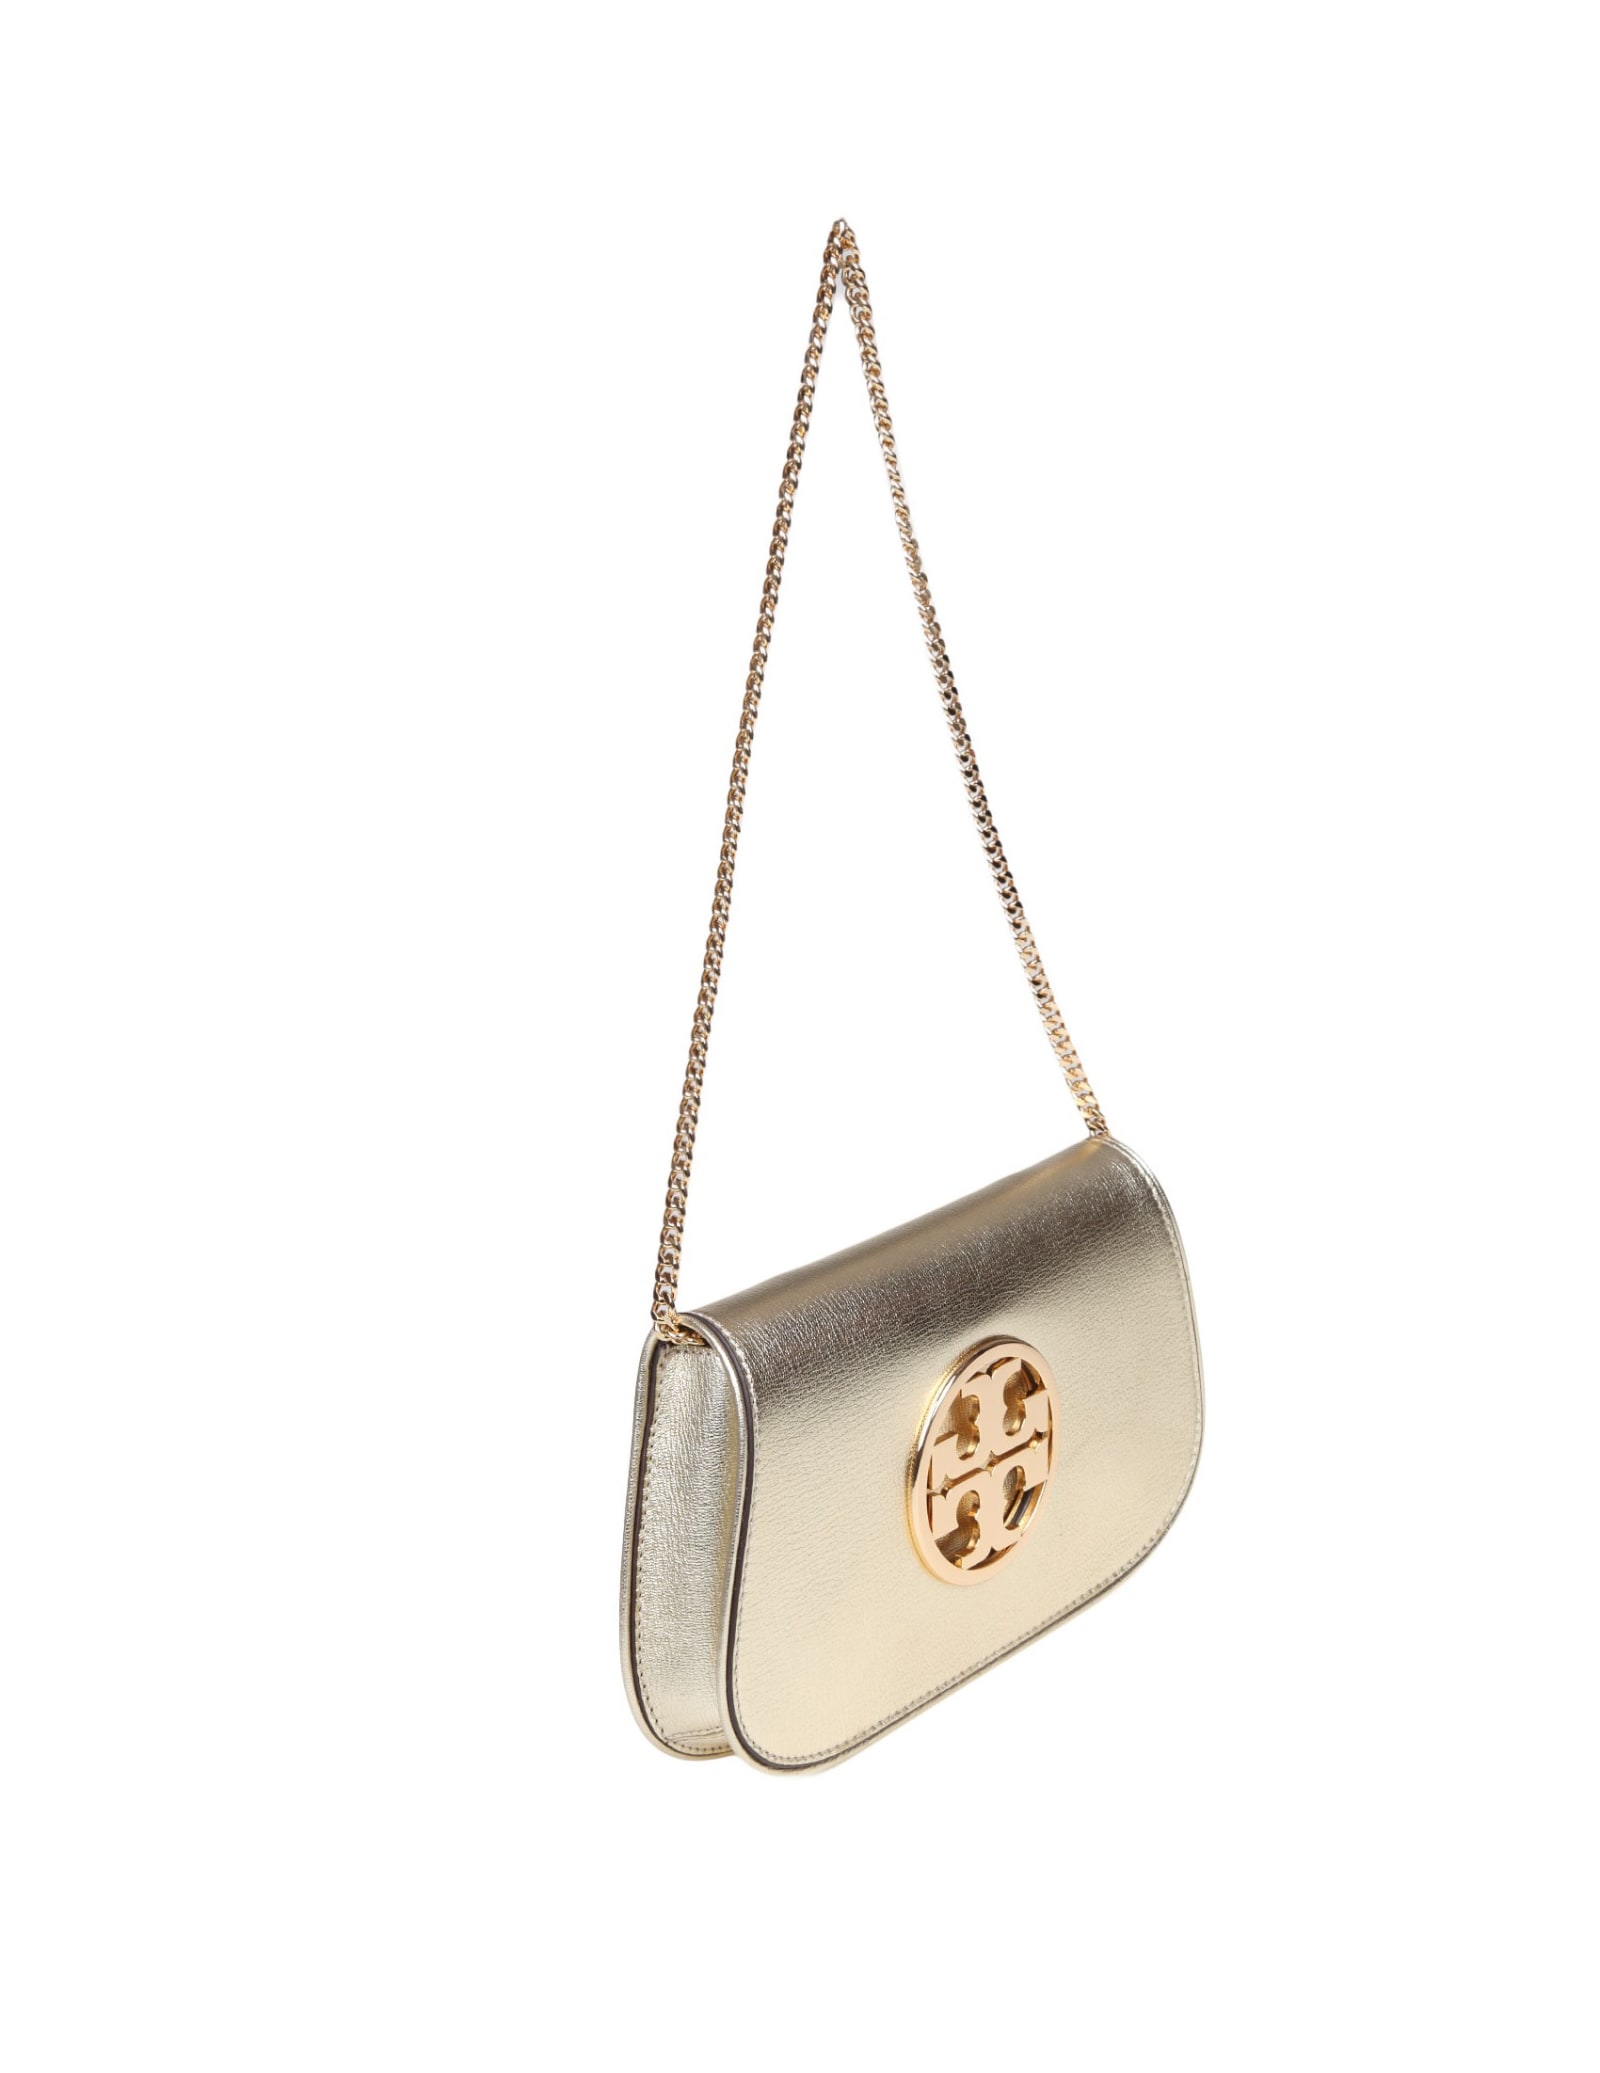 Shop Tory Burch Reva Clutch In Gold Color Leather